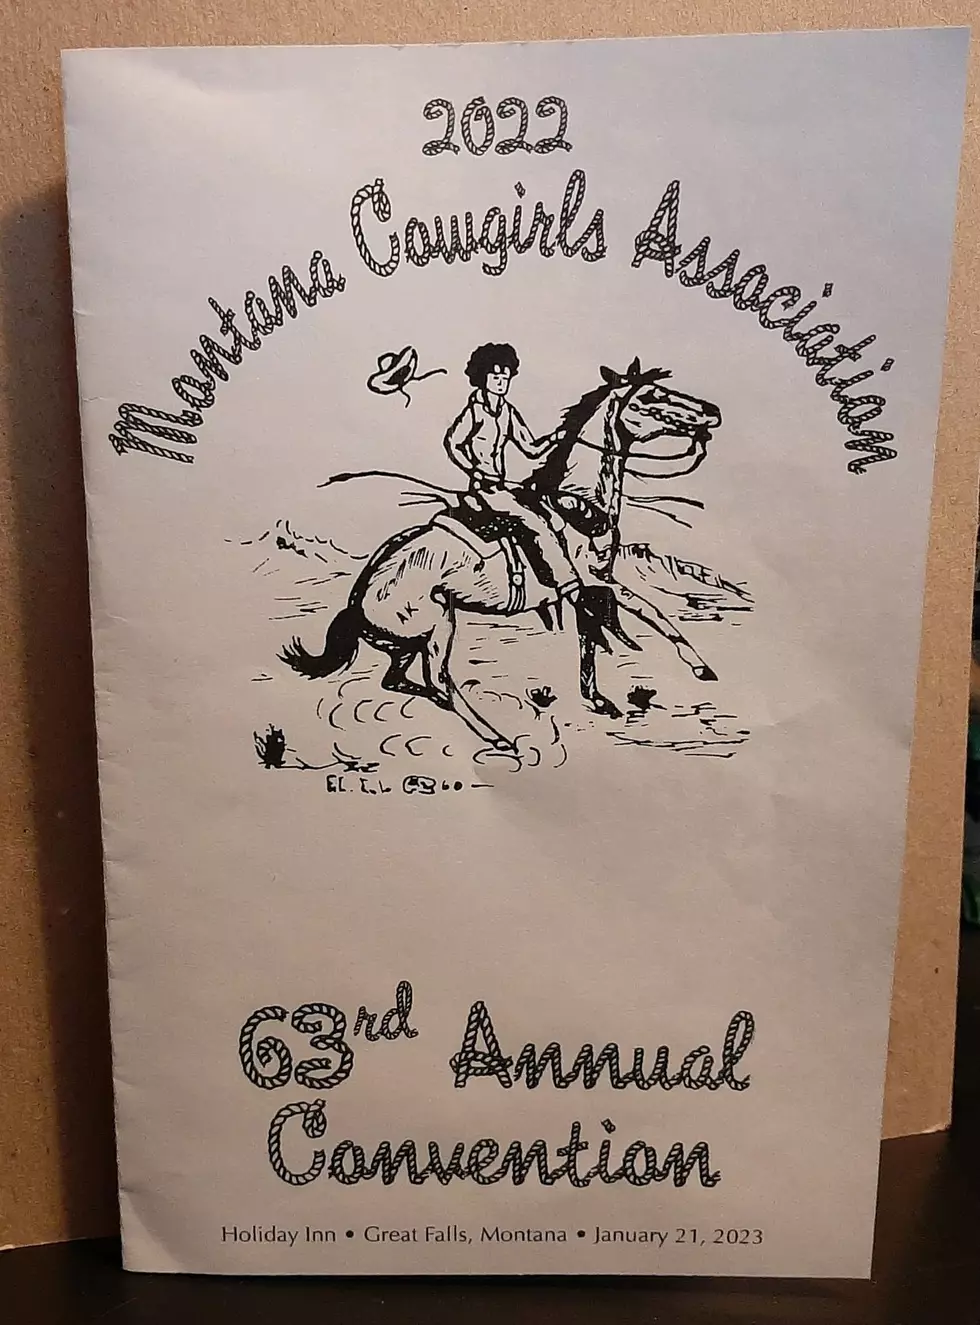 MT Cowgirls Association set to honor locals at upcoming convention